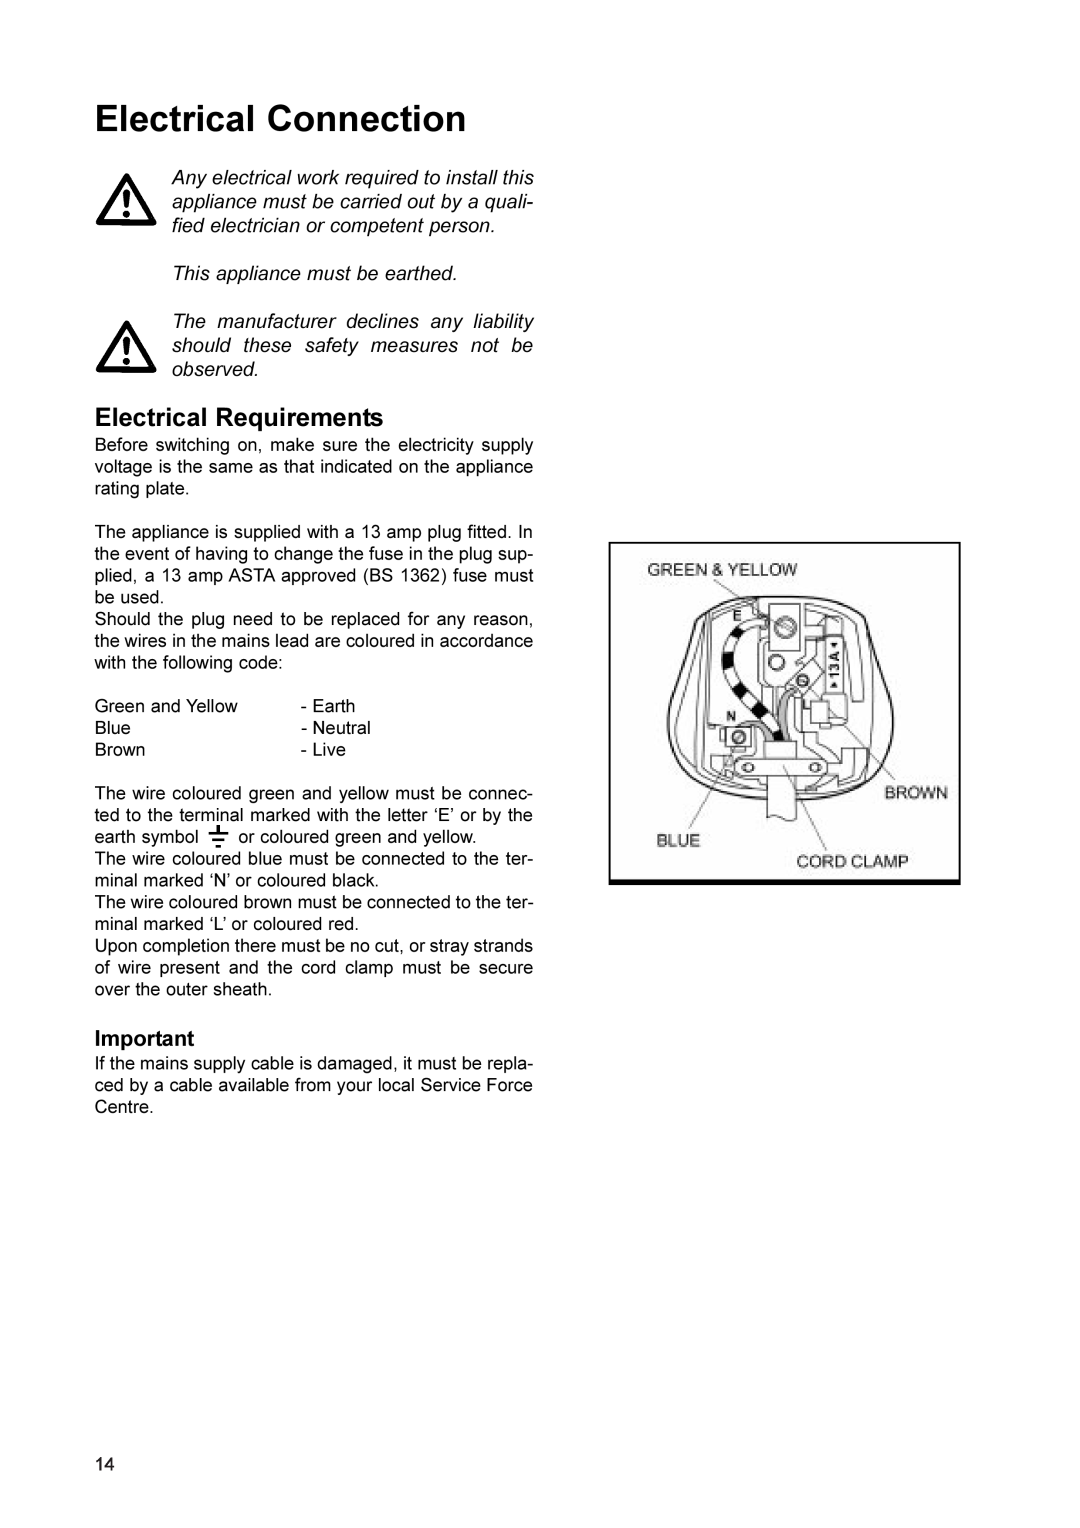 Electrolux ER 3161 BNN, ER 3166 BN, ER 2866 BN manual Electrical Connection, Electrical Requirements 